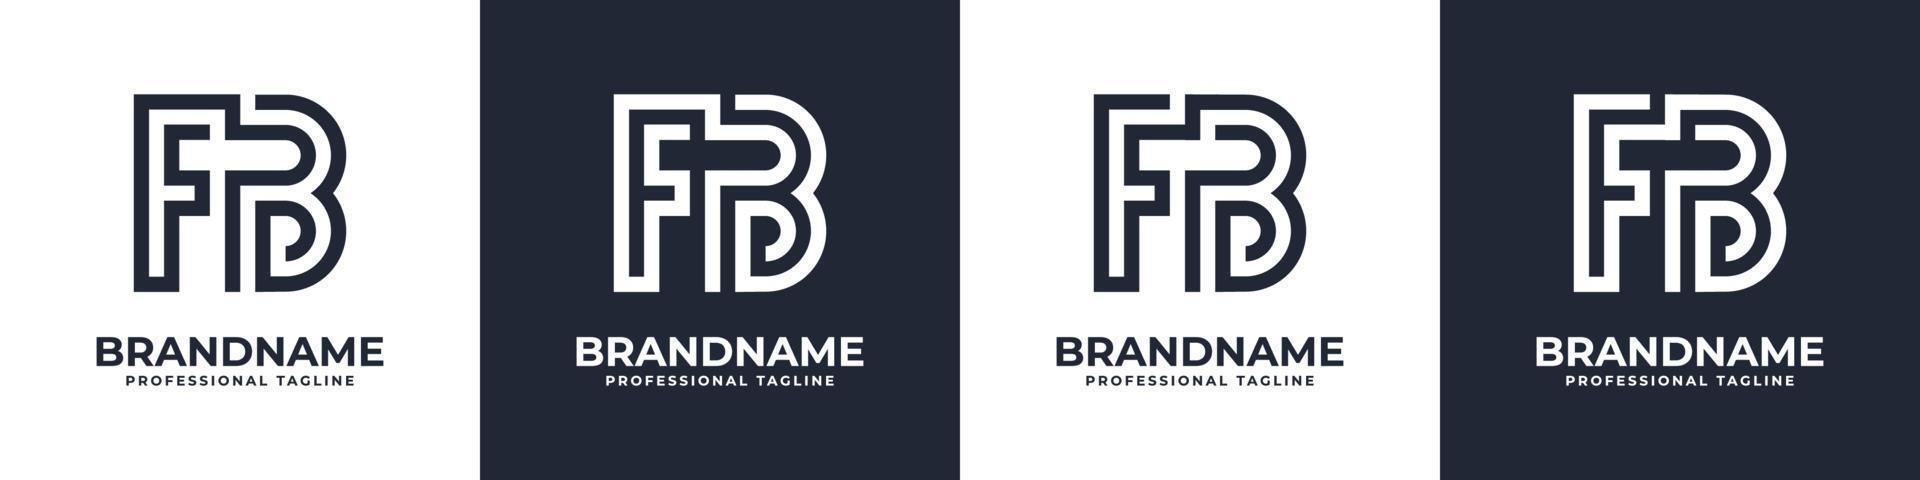 Simple FB Monogram Logo, suitable for any business with FB or BF initial. vector